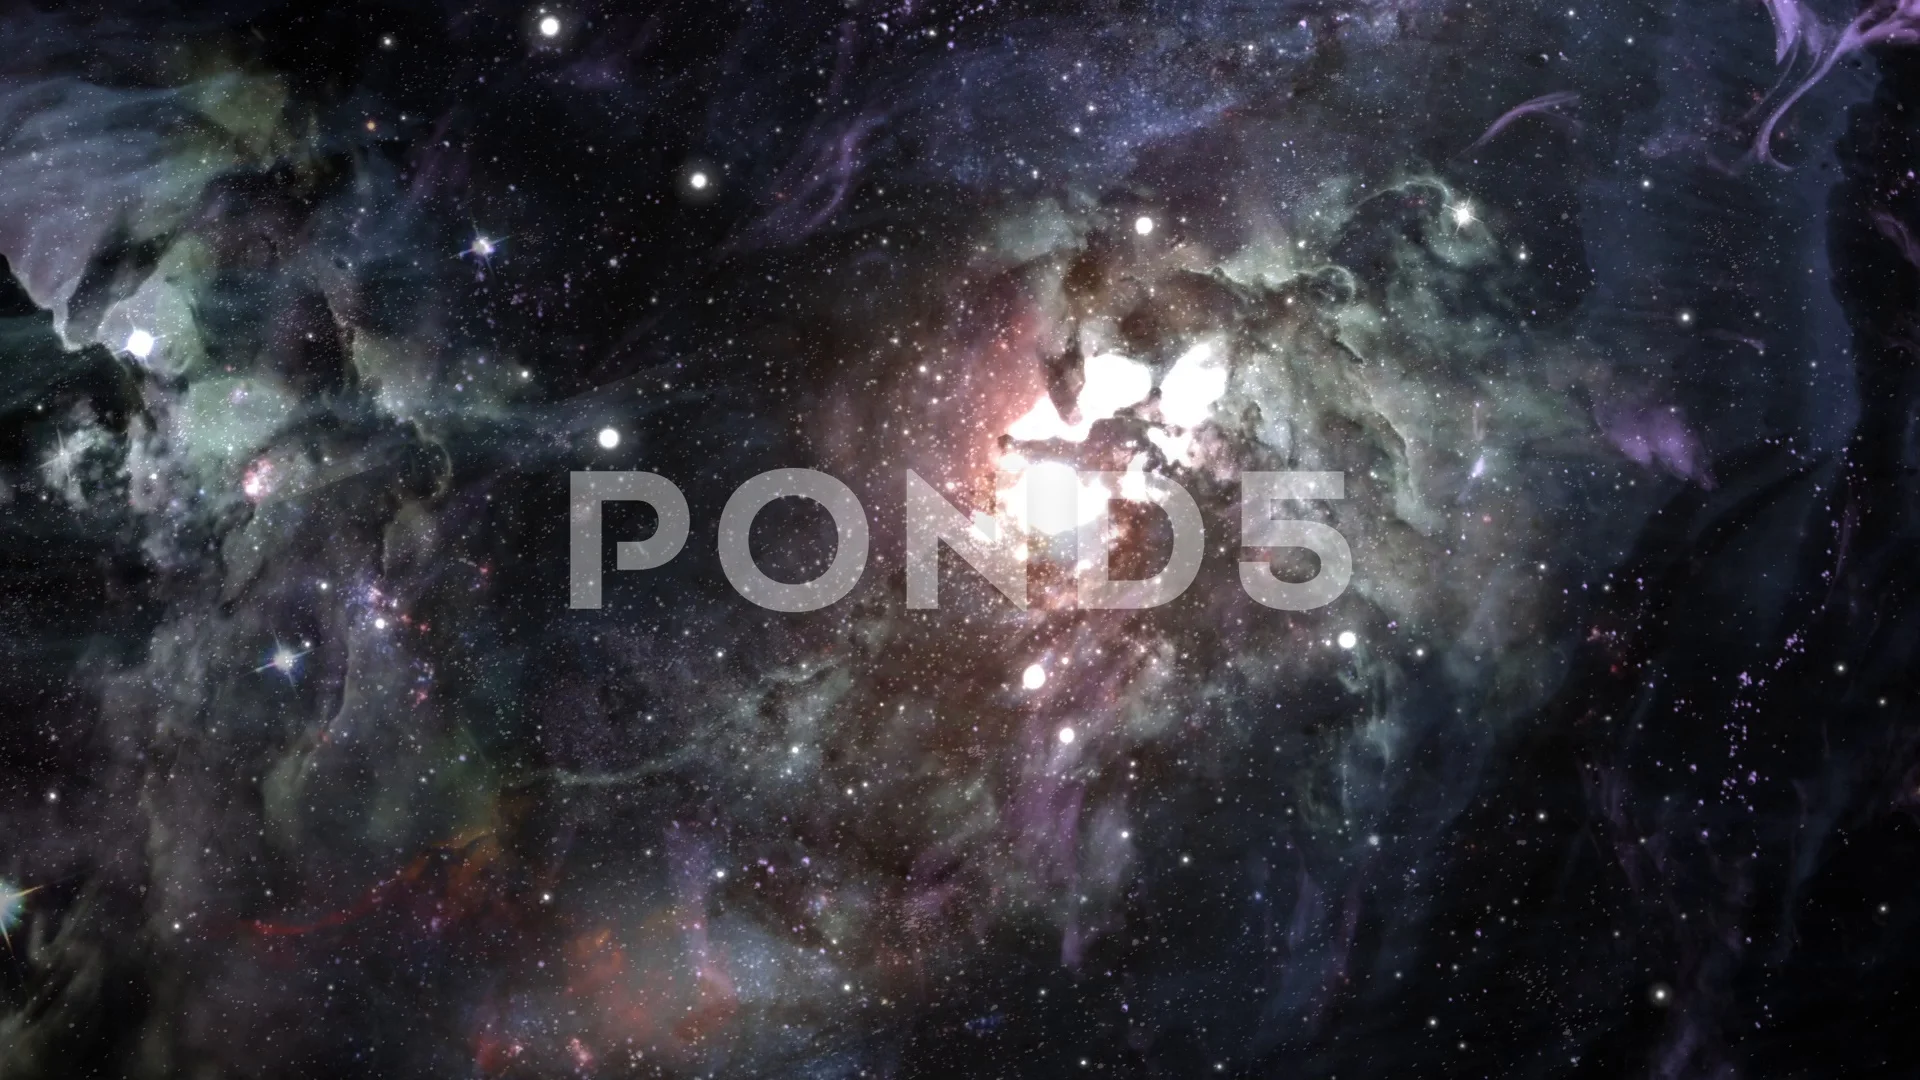 Background animation of galaxy and stars | Stock Video | Pond5